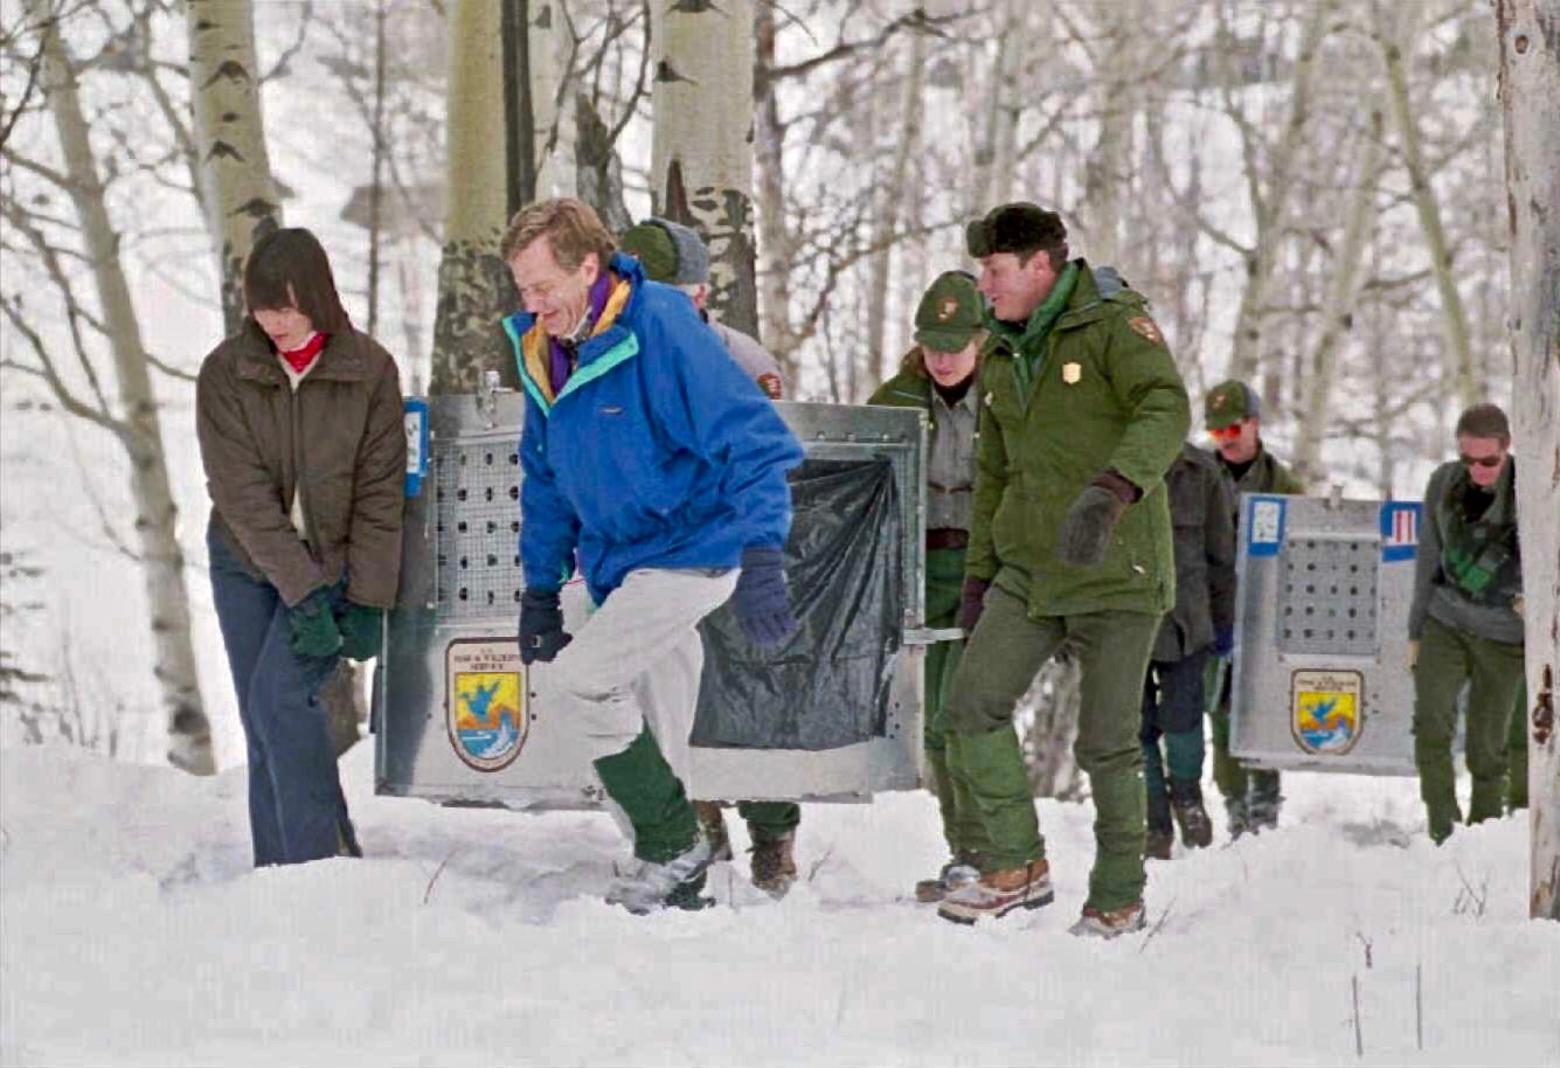 Conservation history made: In January 1995, the late Mollie Beattie, then national director of the U.S. Fish and Wildlife Service, Interior Secretary Bruce Babbitt (blue jacket) and Yellowstone Superintendent Mike Finley to the right of Babbitt, carried in the first group of wolf transplants to their pens in the Lamar Valley of Yellowstone. The author of this essay, Norman Bishop, can be seen in the photo at far right.  Photo courtesy Jim Peaco/National Park Service. 